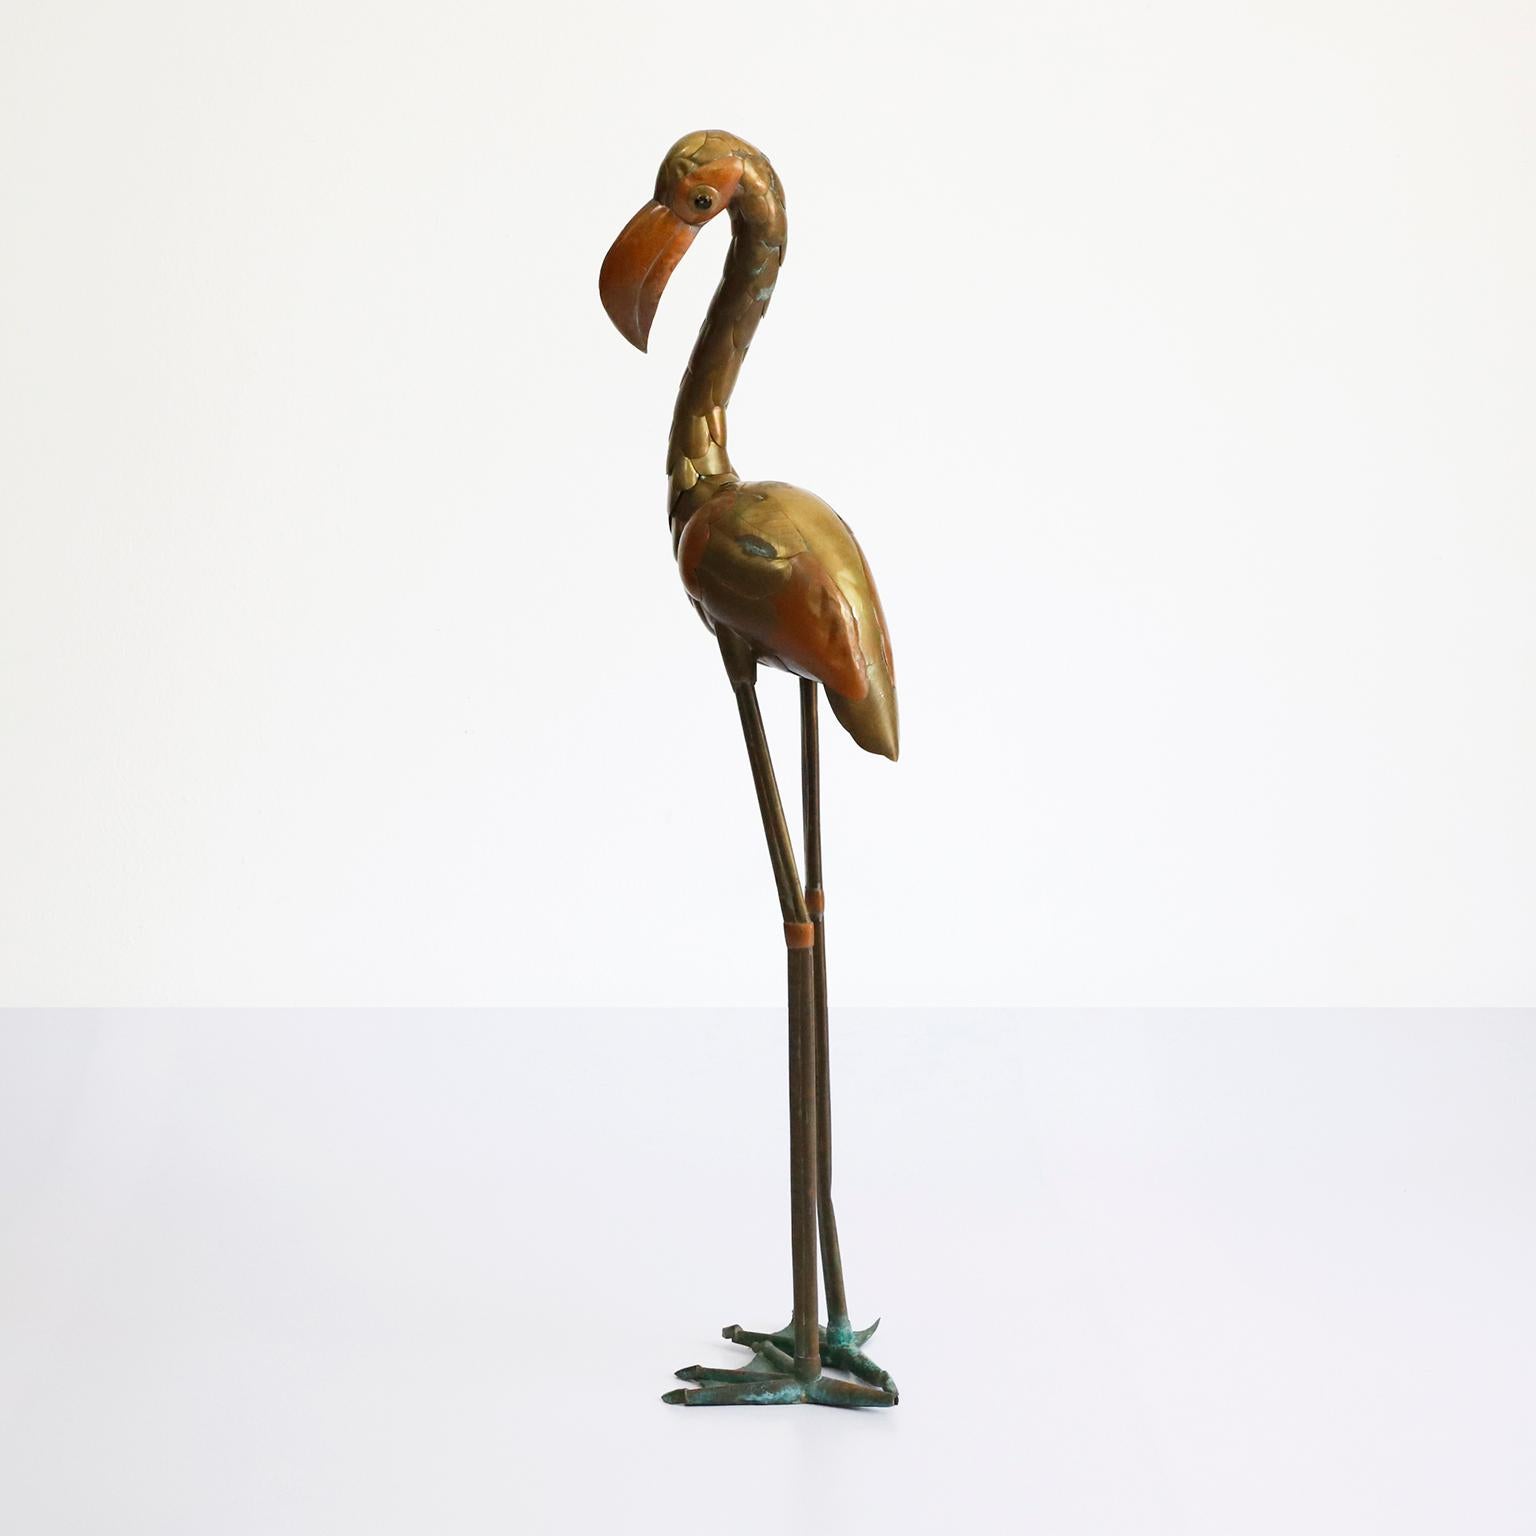 Copper, brass and aluminium Flamingo Sculpture by Sergio Bustamante, circa 1960.

Sergio Bustamante is a Mexican Artist and sculptor. He began with paintings and papier mache figures, inaugurating the first exhibit of his works at the Galeria